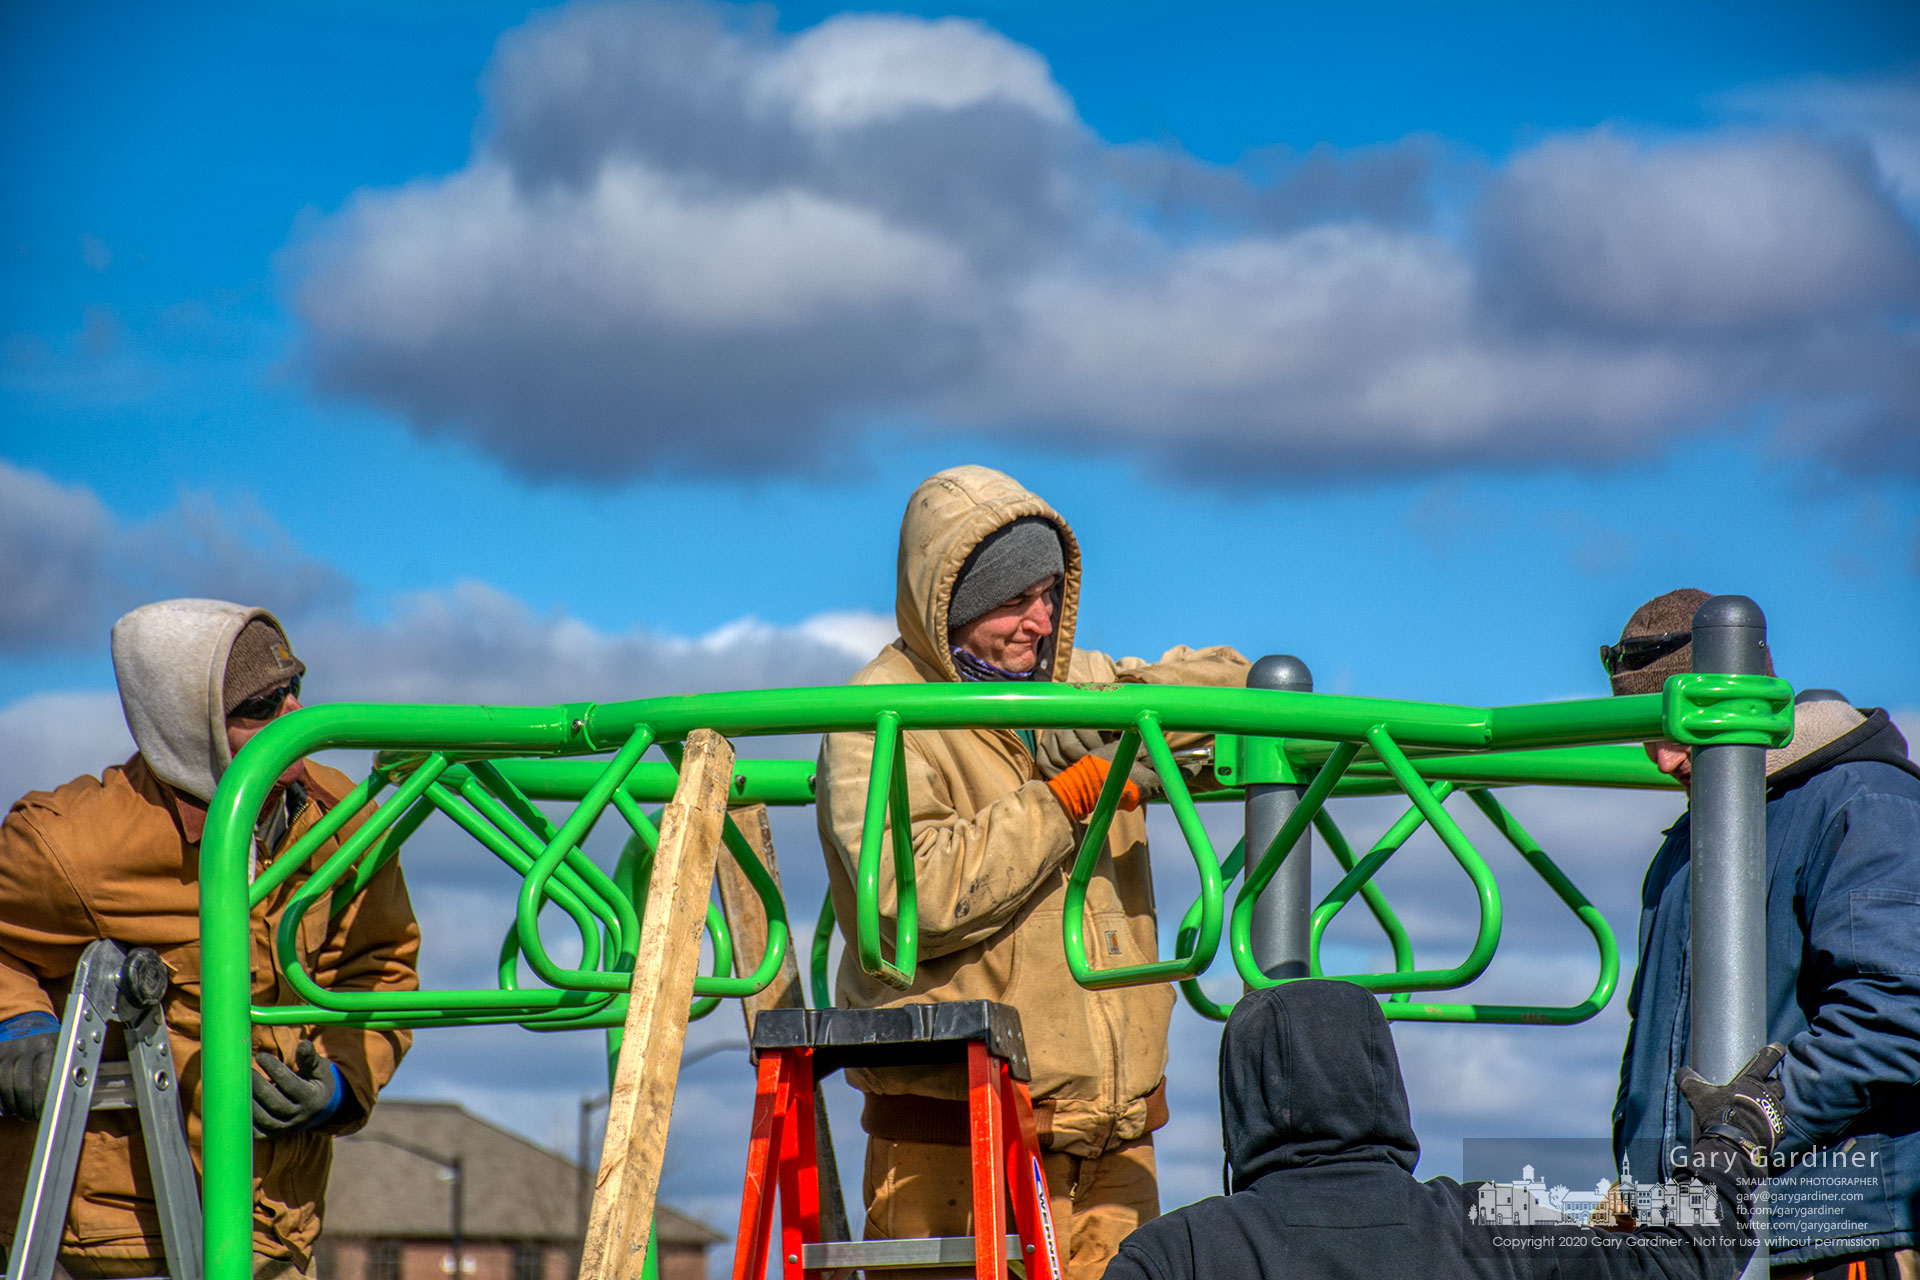 Under partly cloudy skies and below normal temperatures a Westerville Parks crew works to install new equipment on the redesigned playground at the sports fields across Cleveland Ave. from the community center. My Final Photo for Feb. 20, 2020.